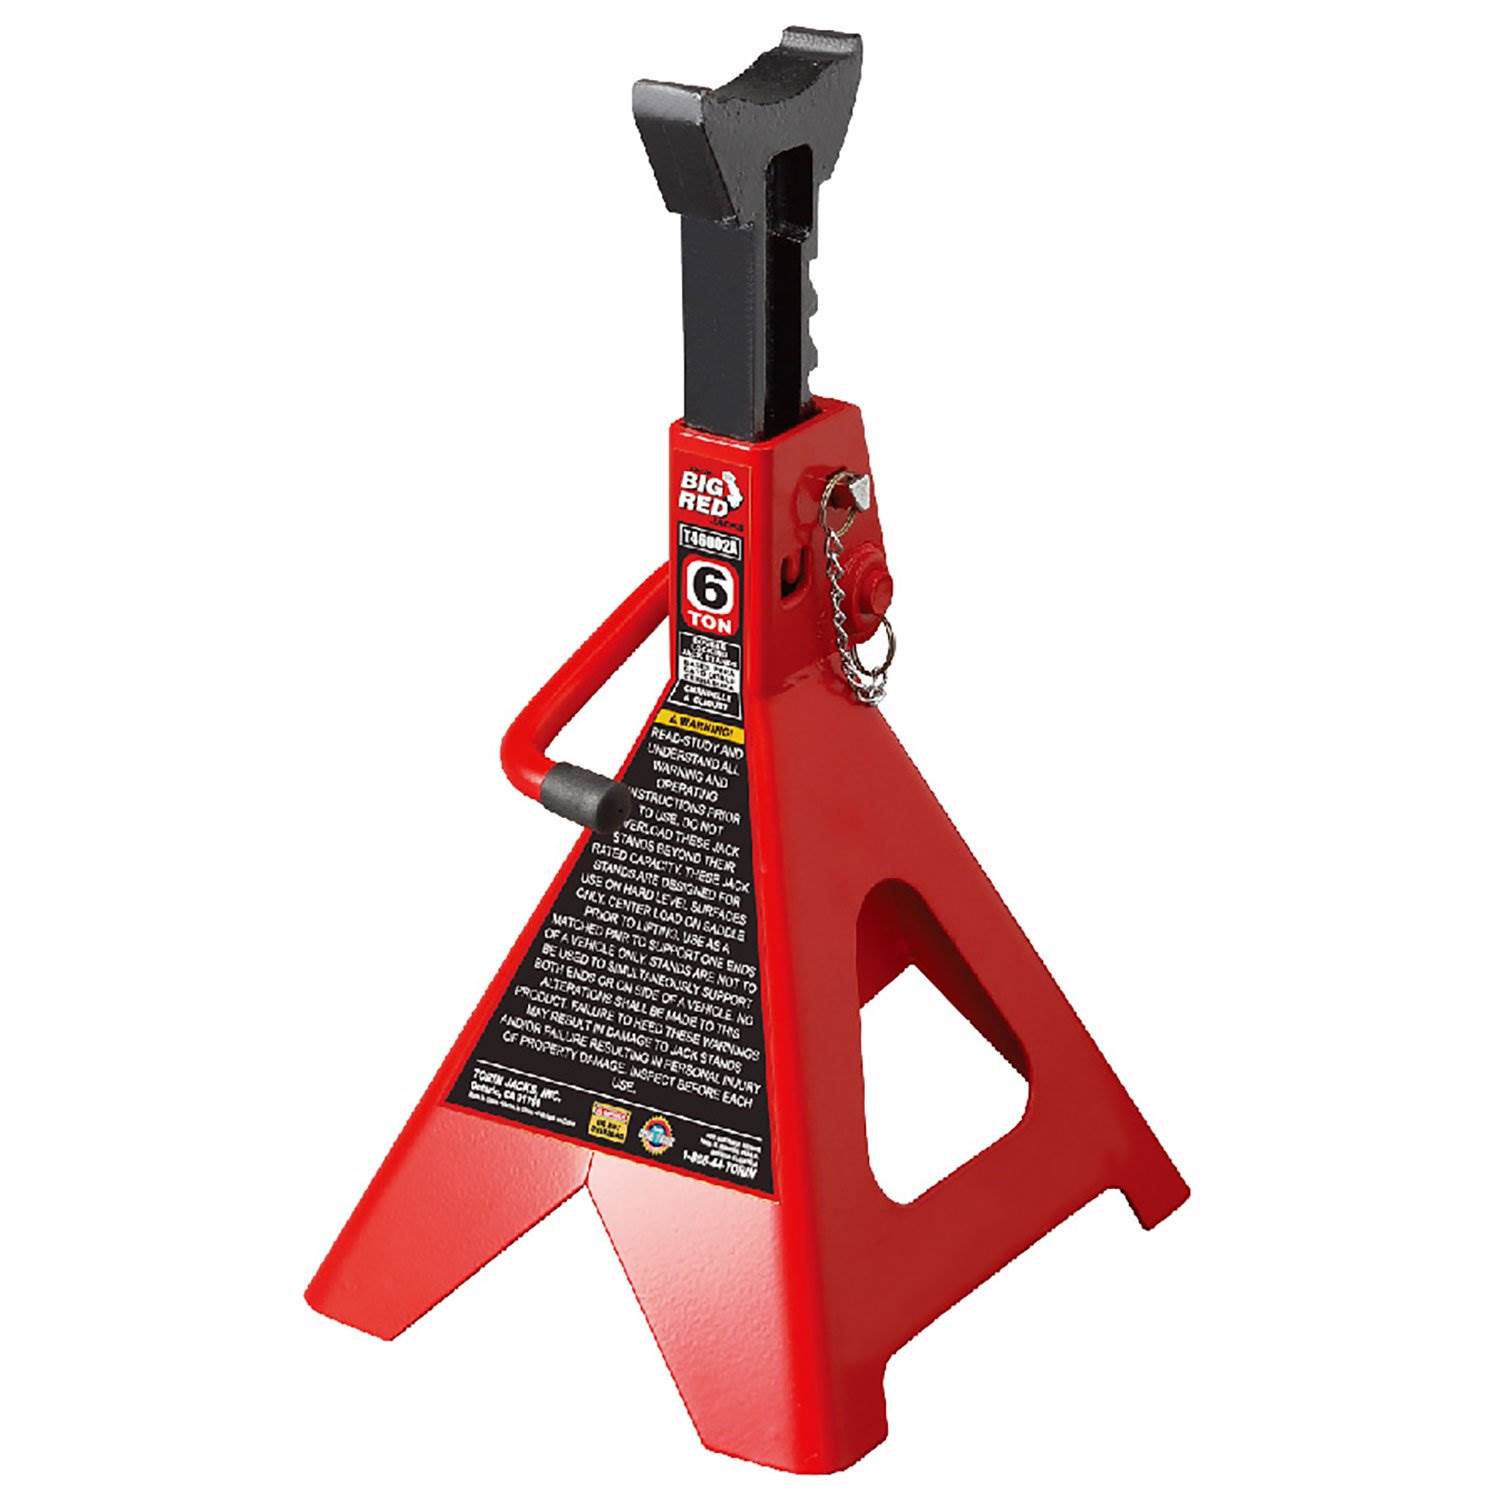 Torin Big Red 6 Ton Capacity Heavy Duty Double Locking Steel Jack Stands, 1 Pair - image 2 of 7